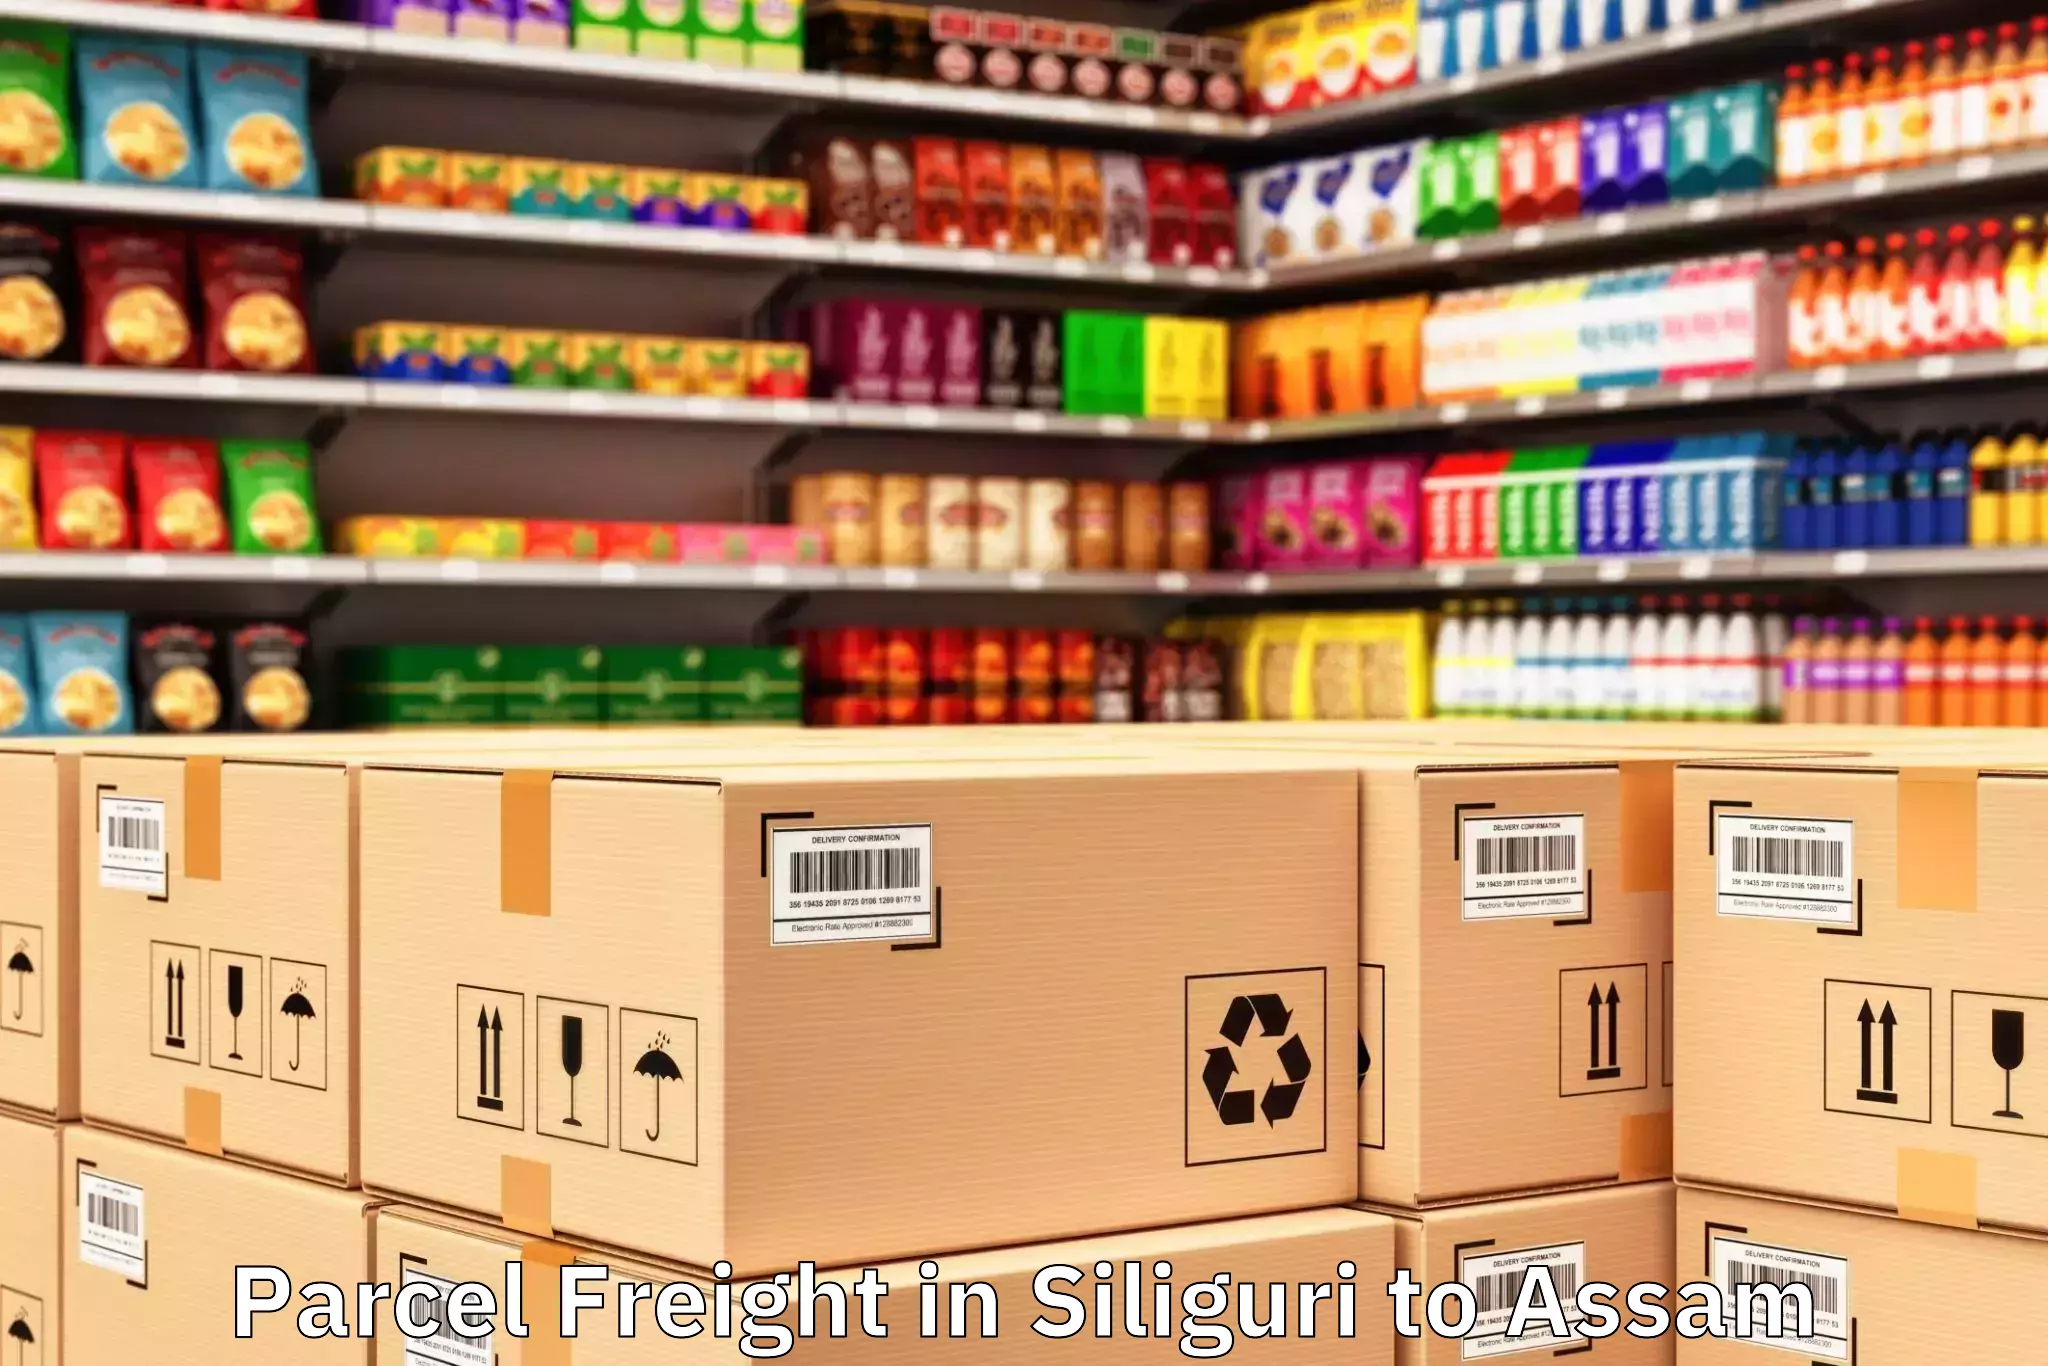 Top Siliguri to Shivsagar Parcel Freight Available